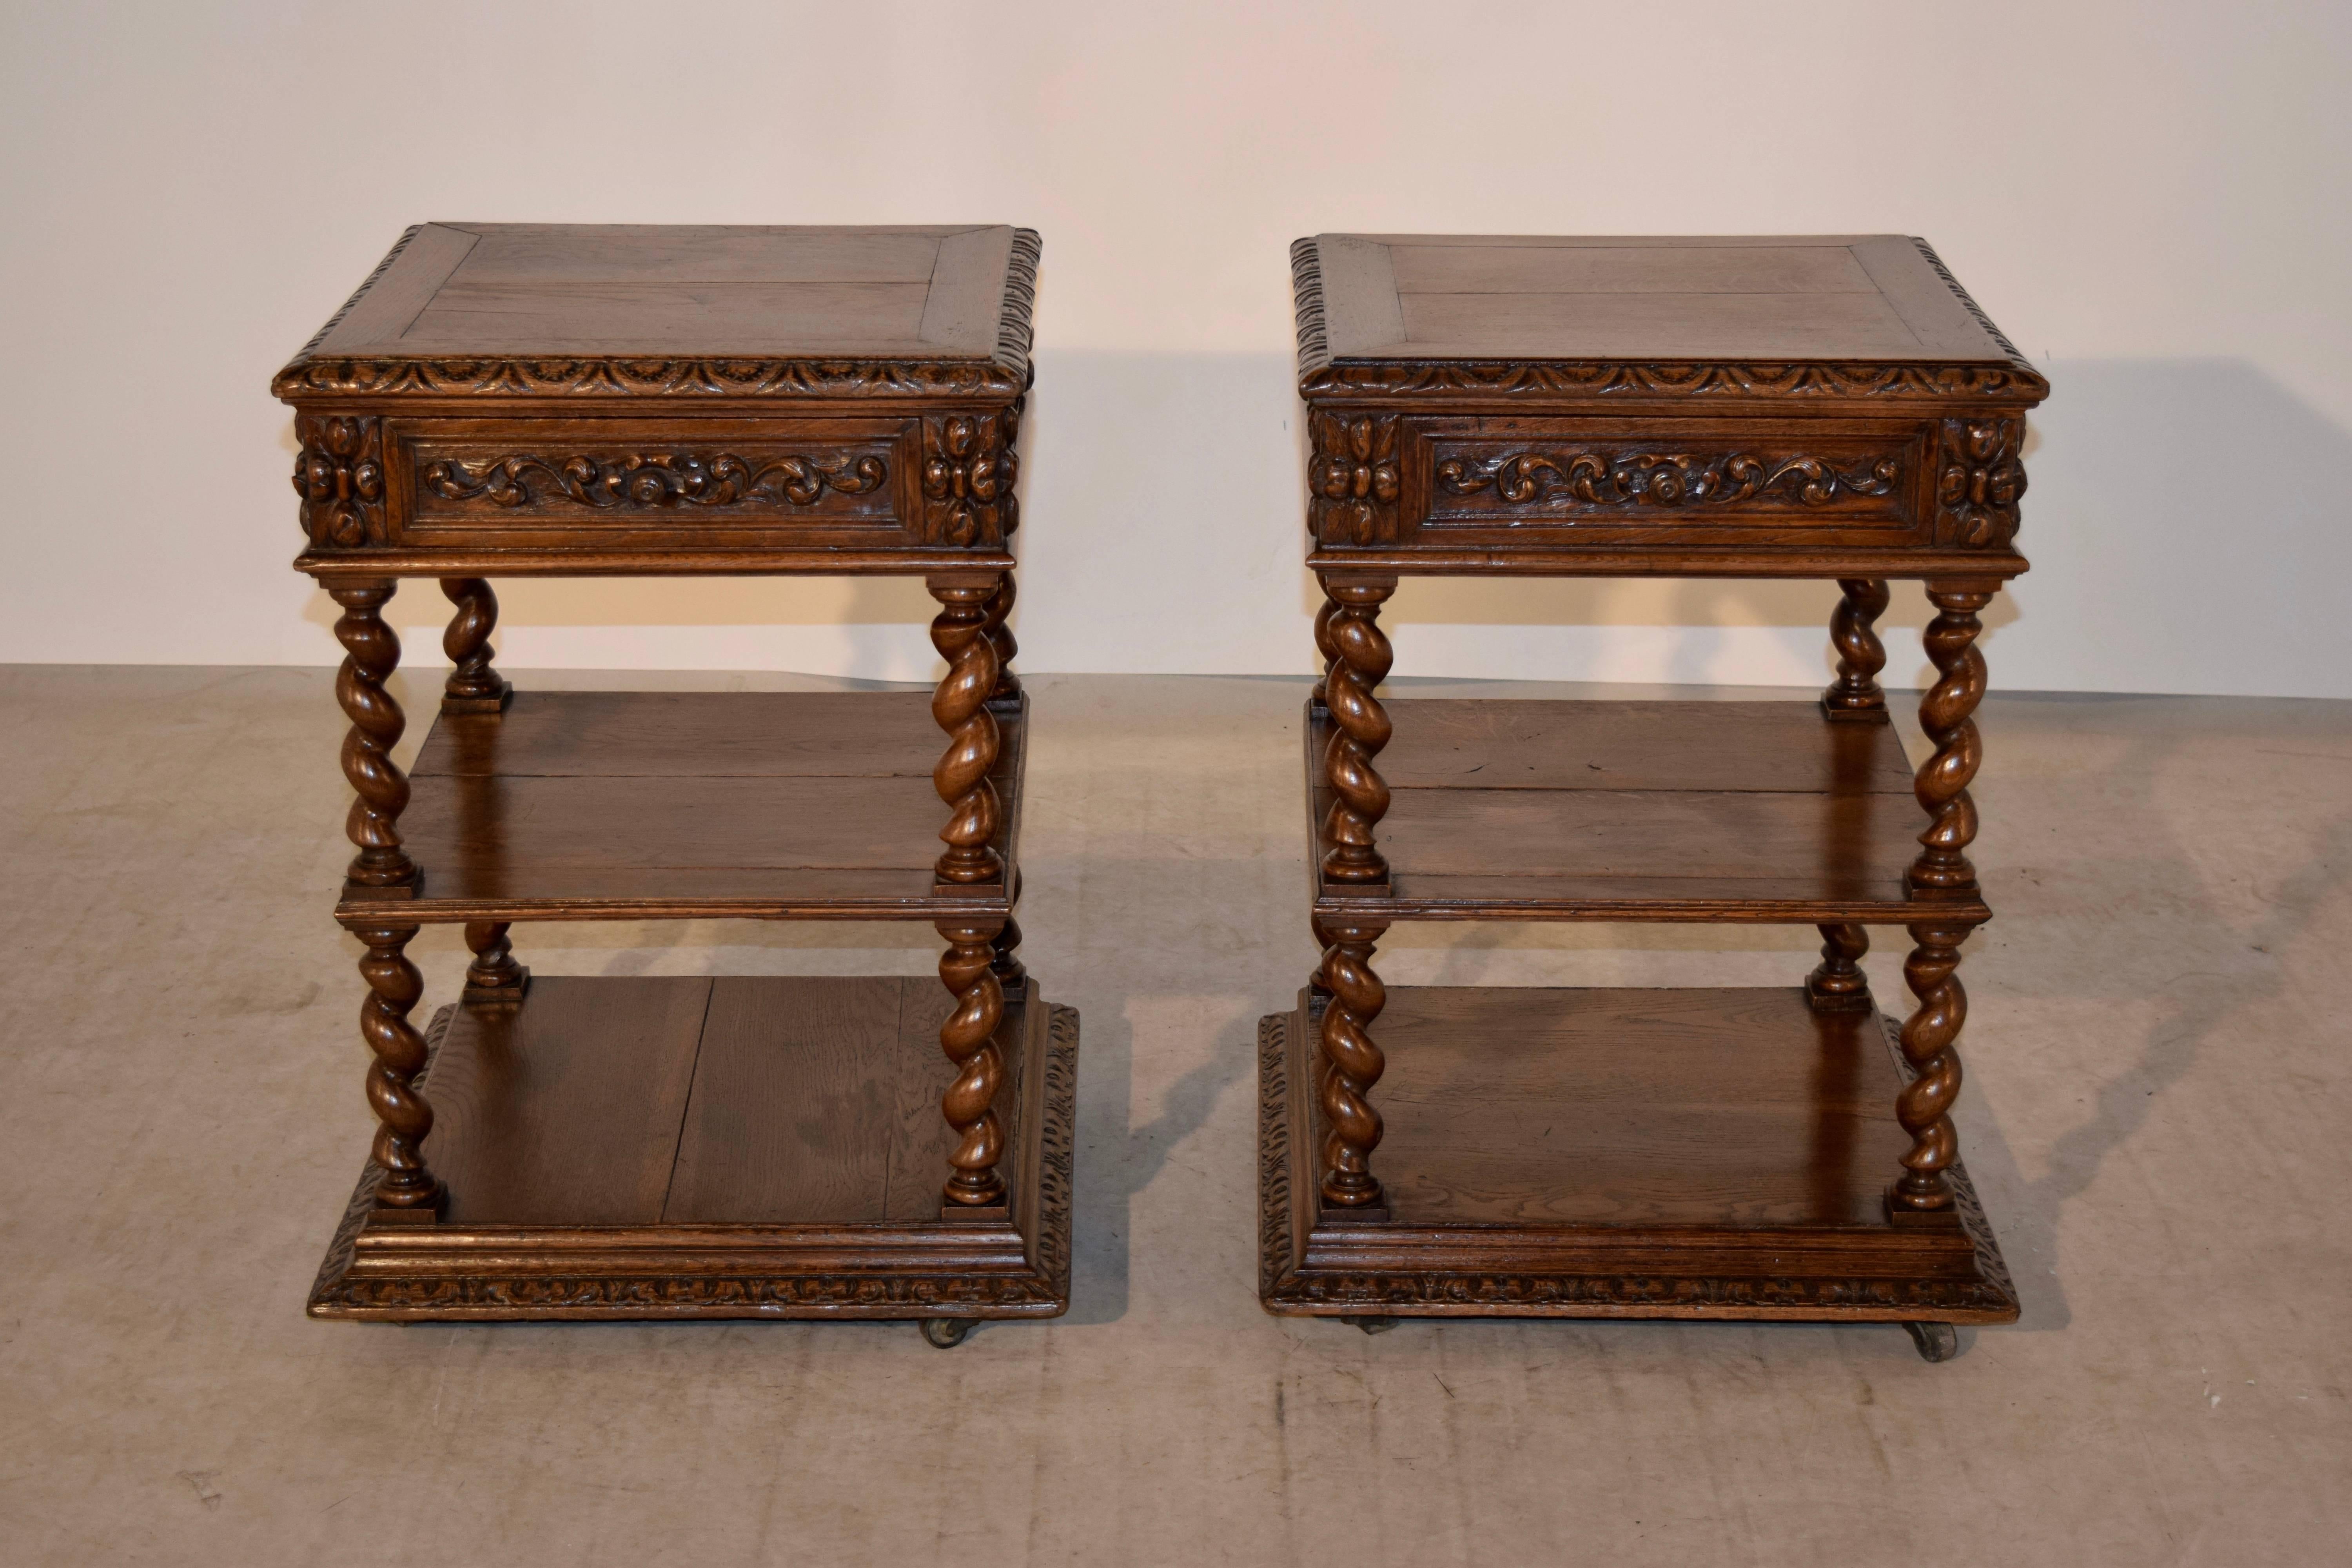 19th century pair of hand-carved oak side tables from France. The tops has bevelled and carved decorated edges following down to hand-carved panelled sides. The front side contains a single drawer, which is carved to match the side panels. There are